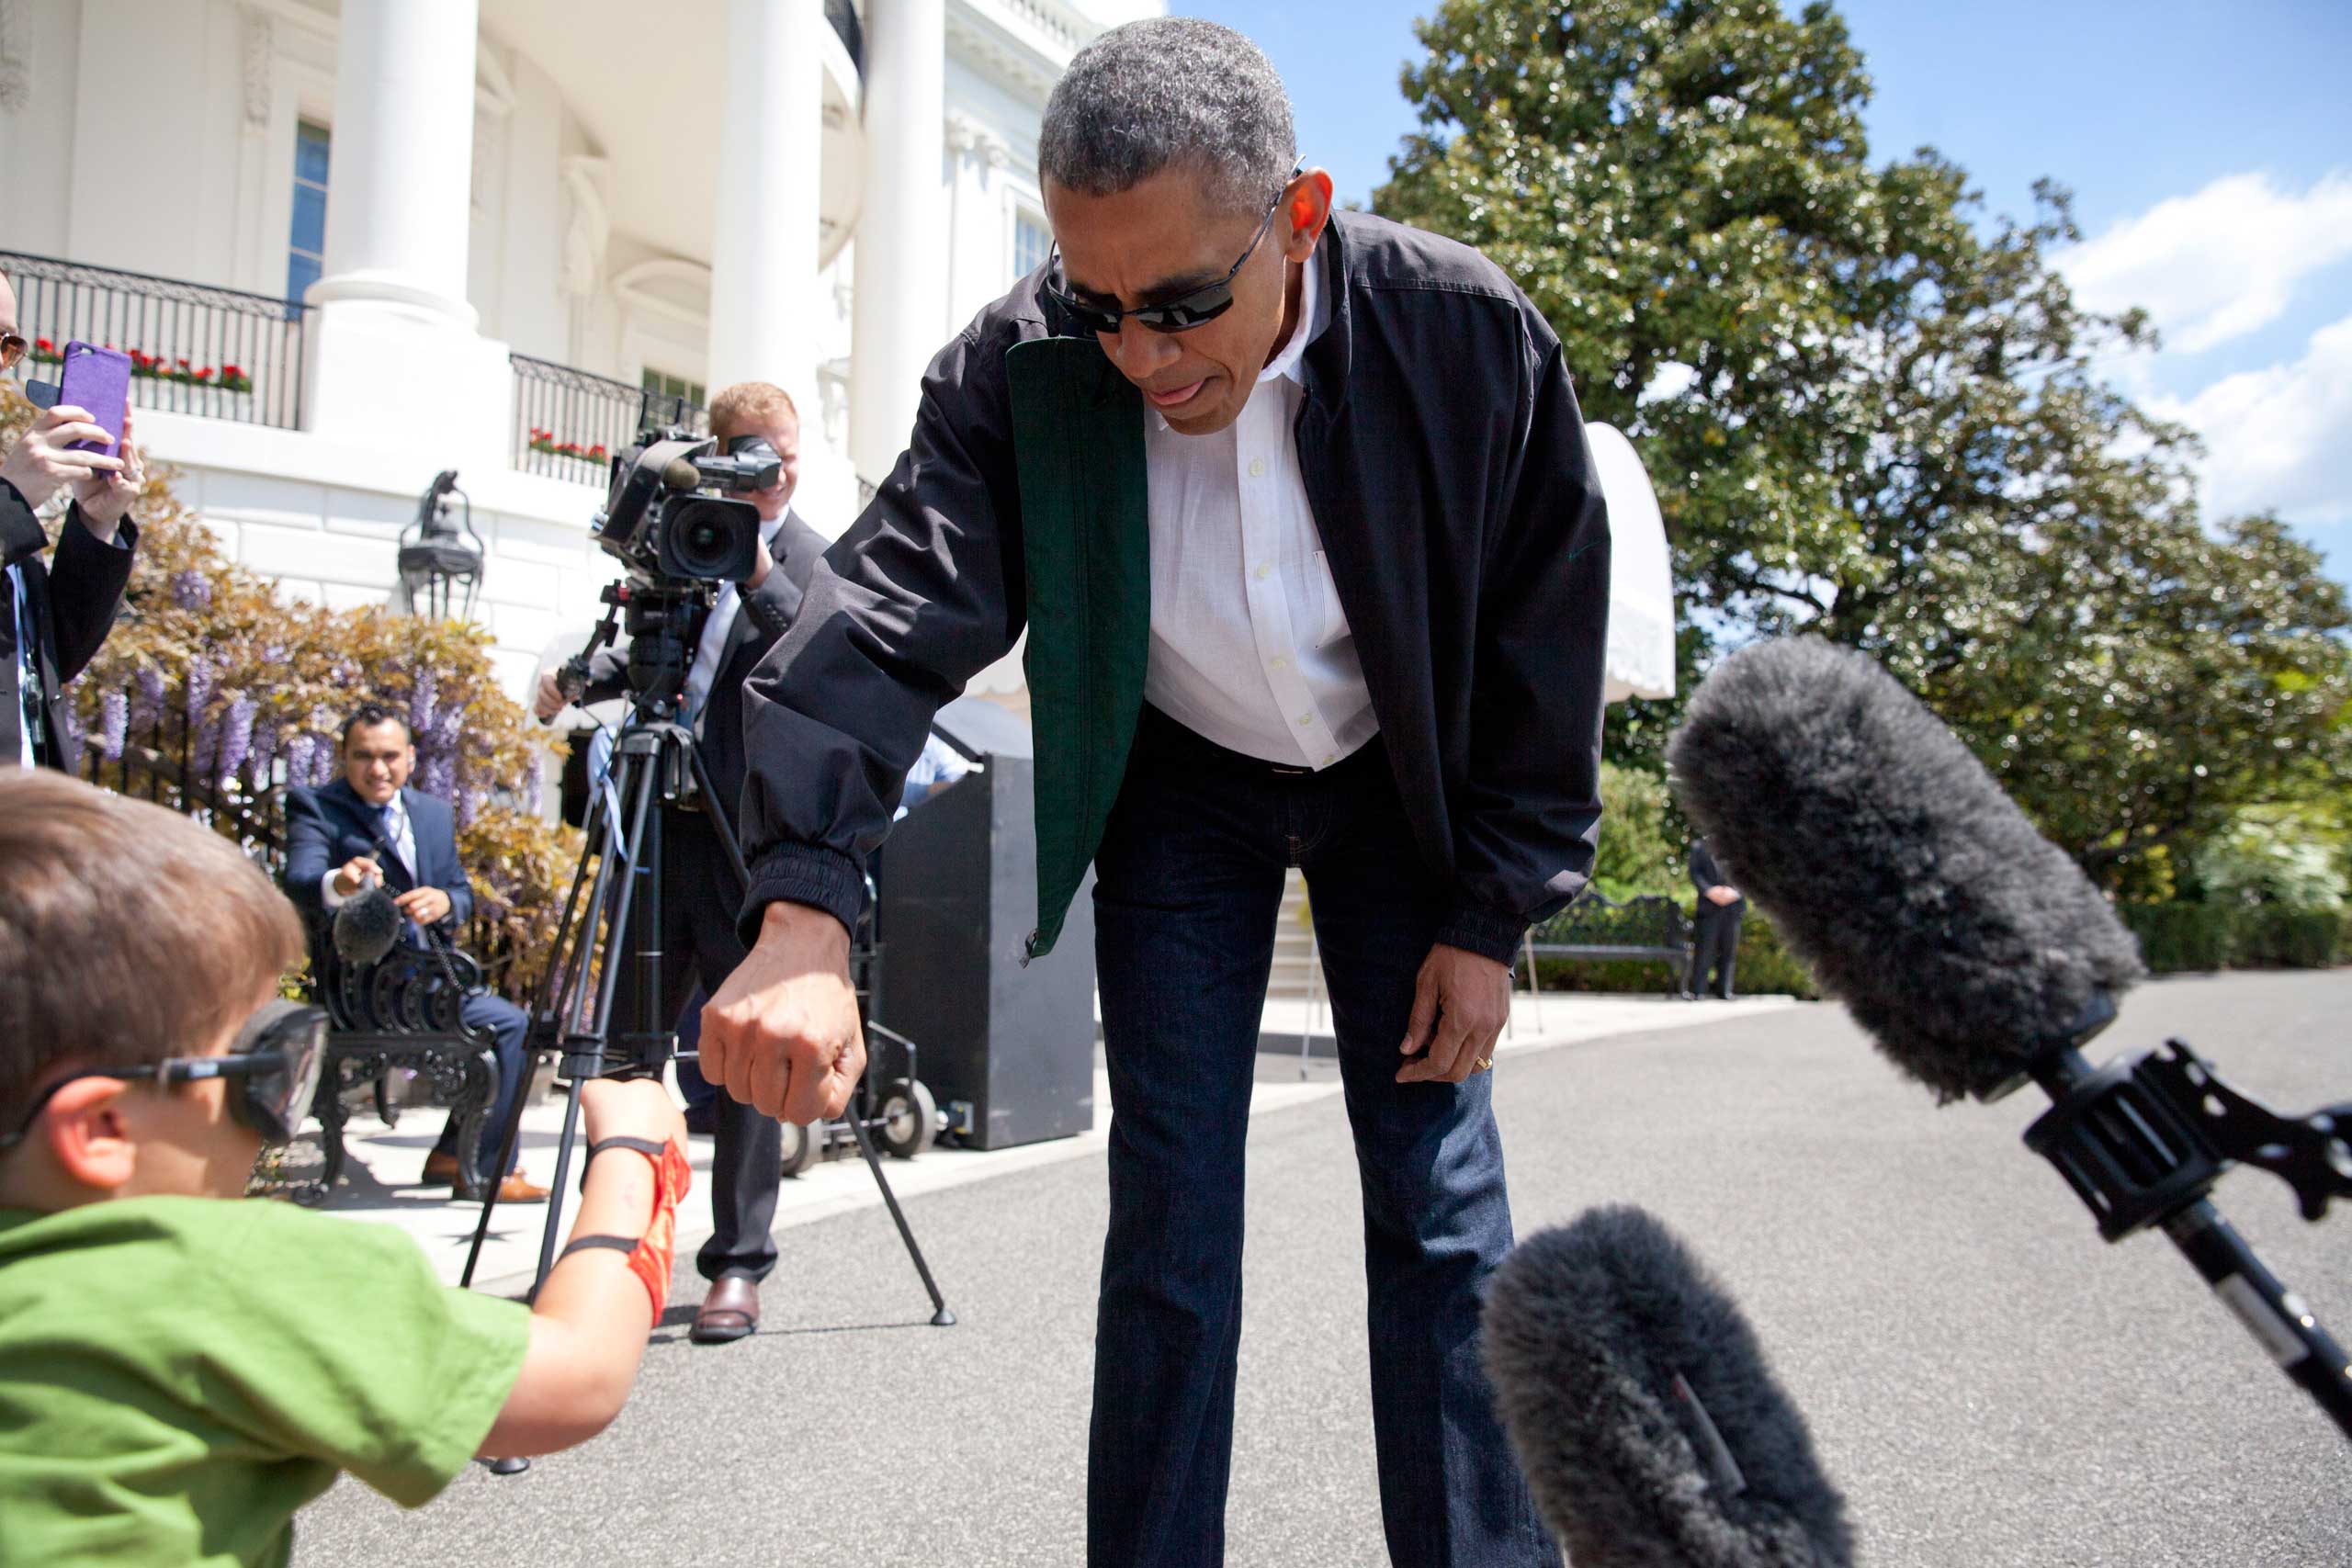 President Barack Obama greets Luca Martinez, 4, with a fist-bump as he walks from the White House to board Marine One in Washington on May 2, 2015. (Carolyn Kaster—AP)